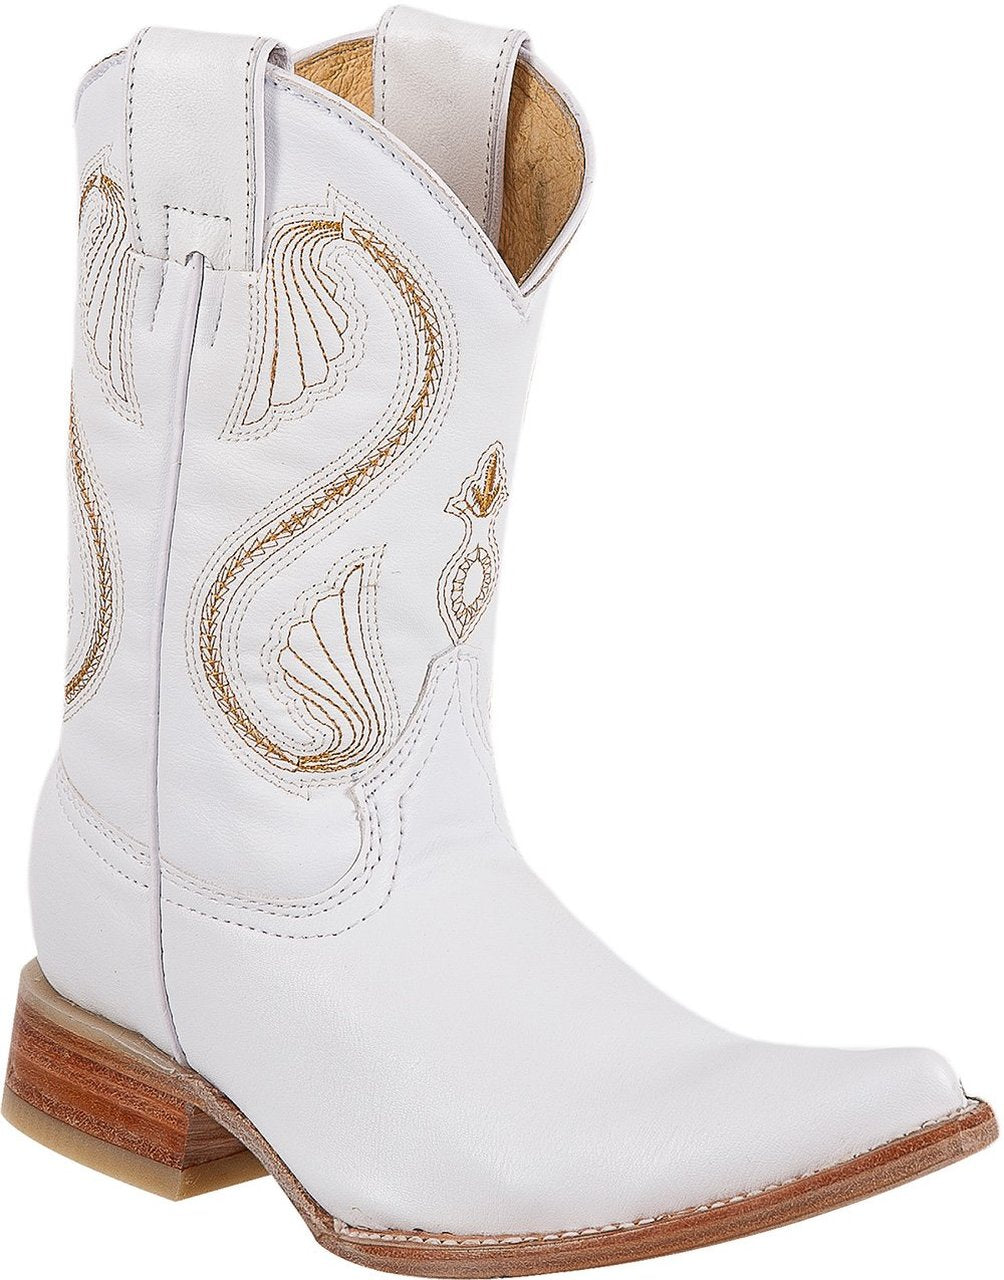 DIEGO'S Kids' White Goat Boots - Ch Toe